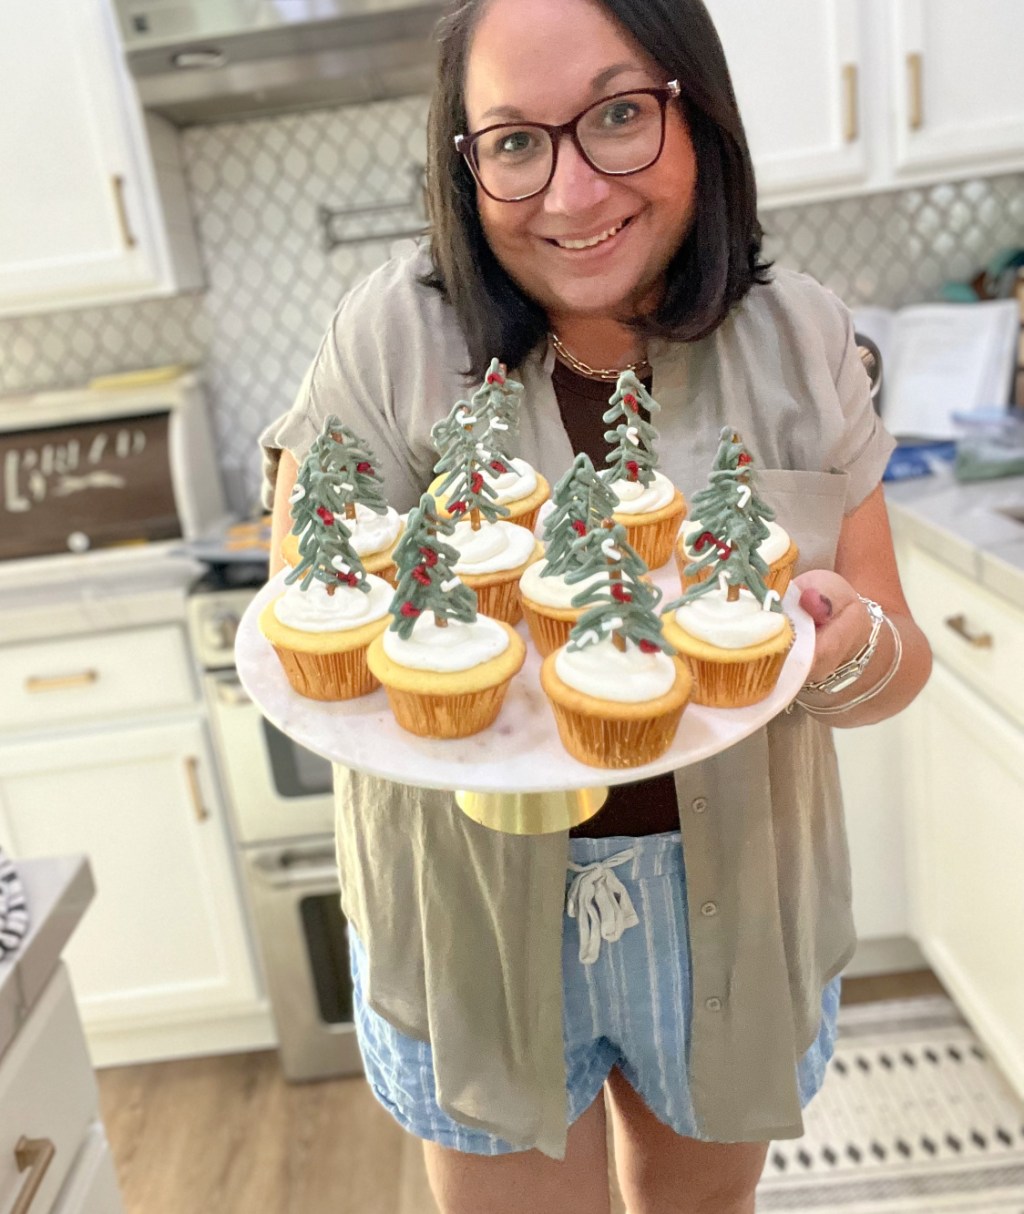 woman holding a cake stand with christmas tree cupcakes